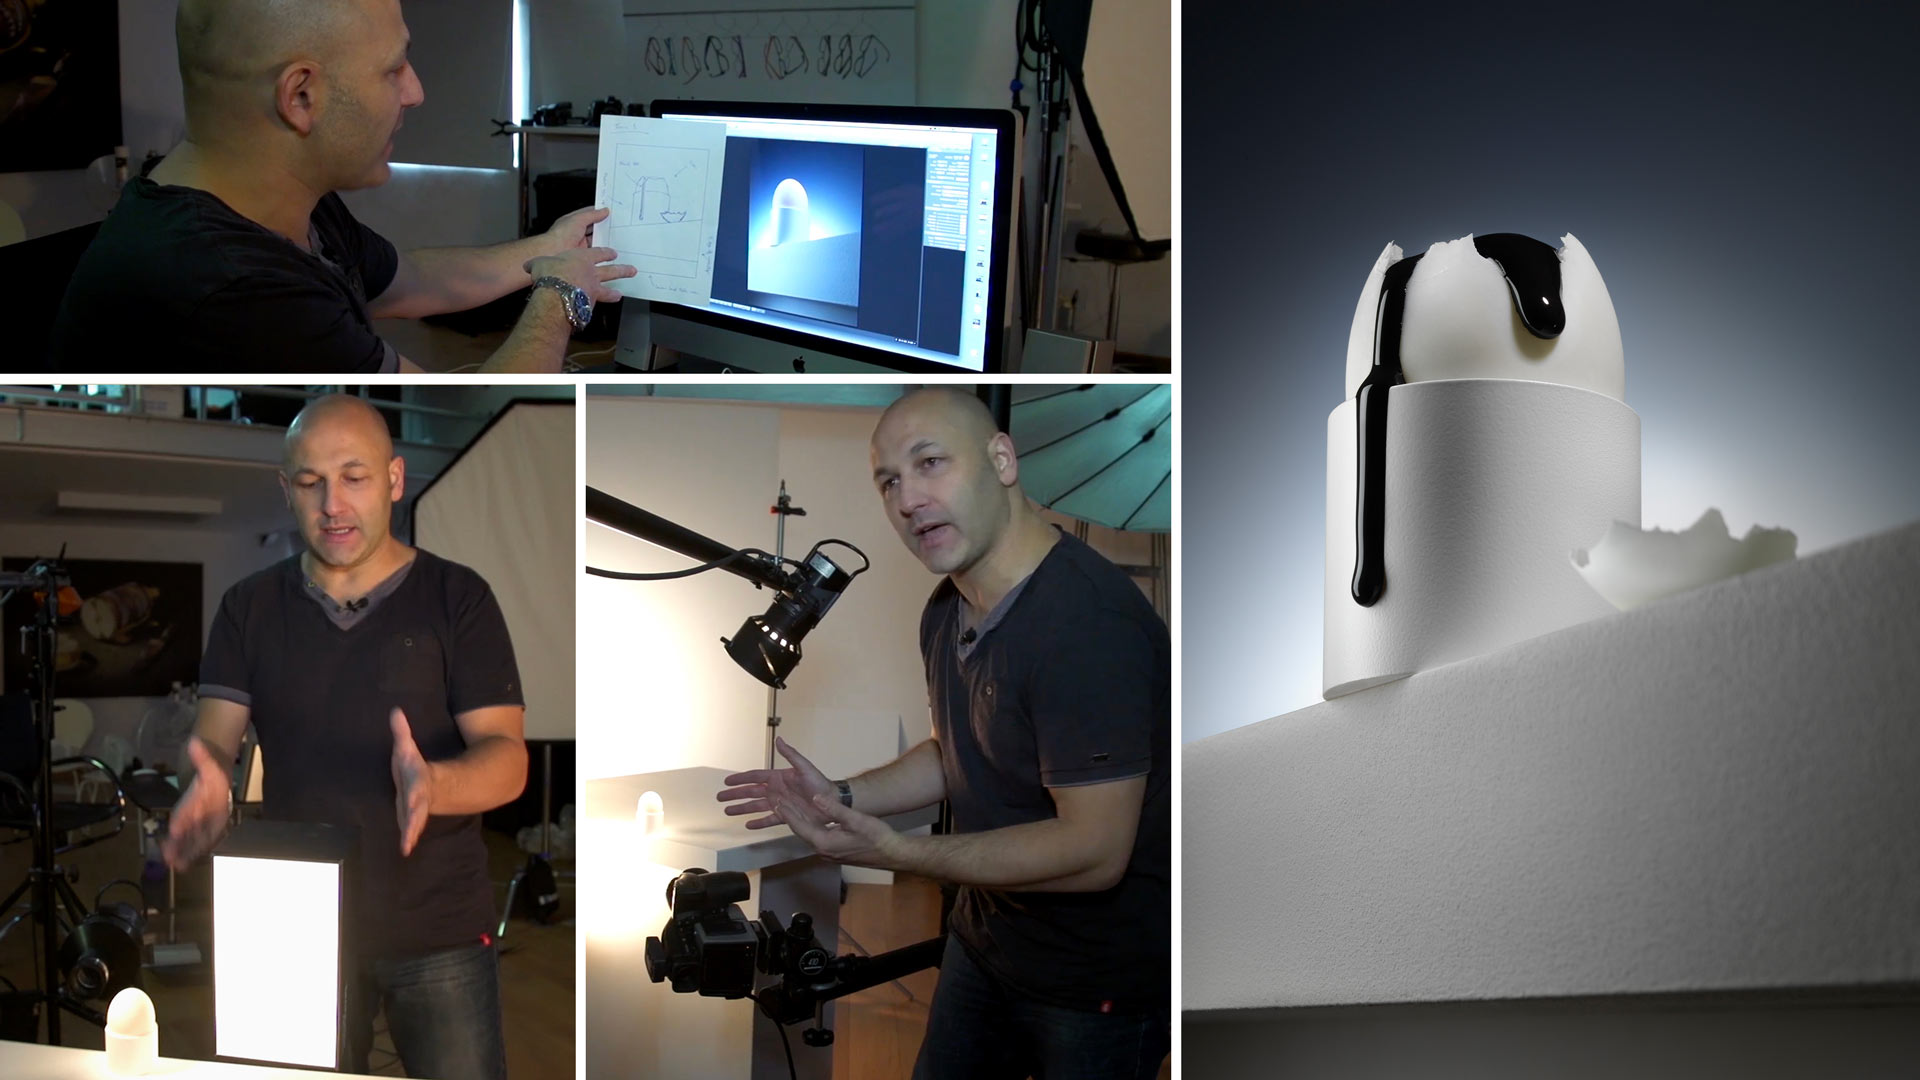 Lighting and Equipment Overview for Still Life Photo: Toxic Egg